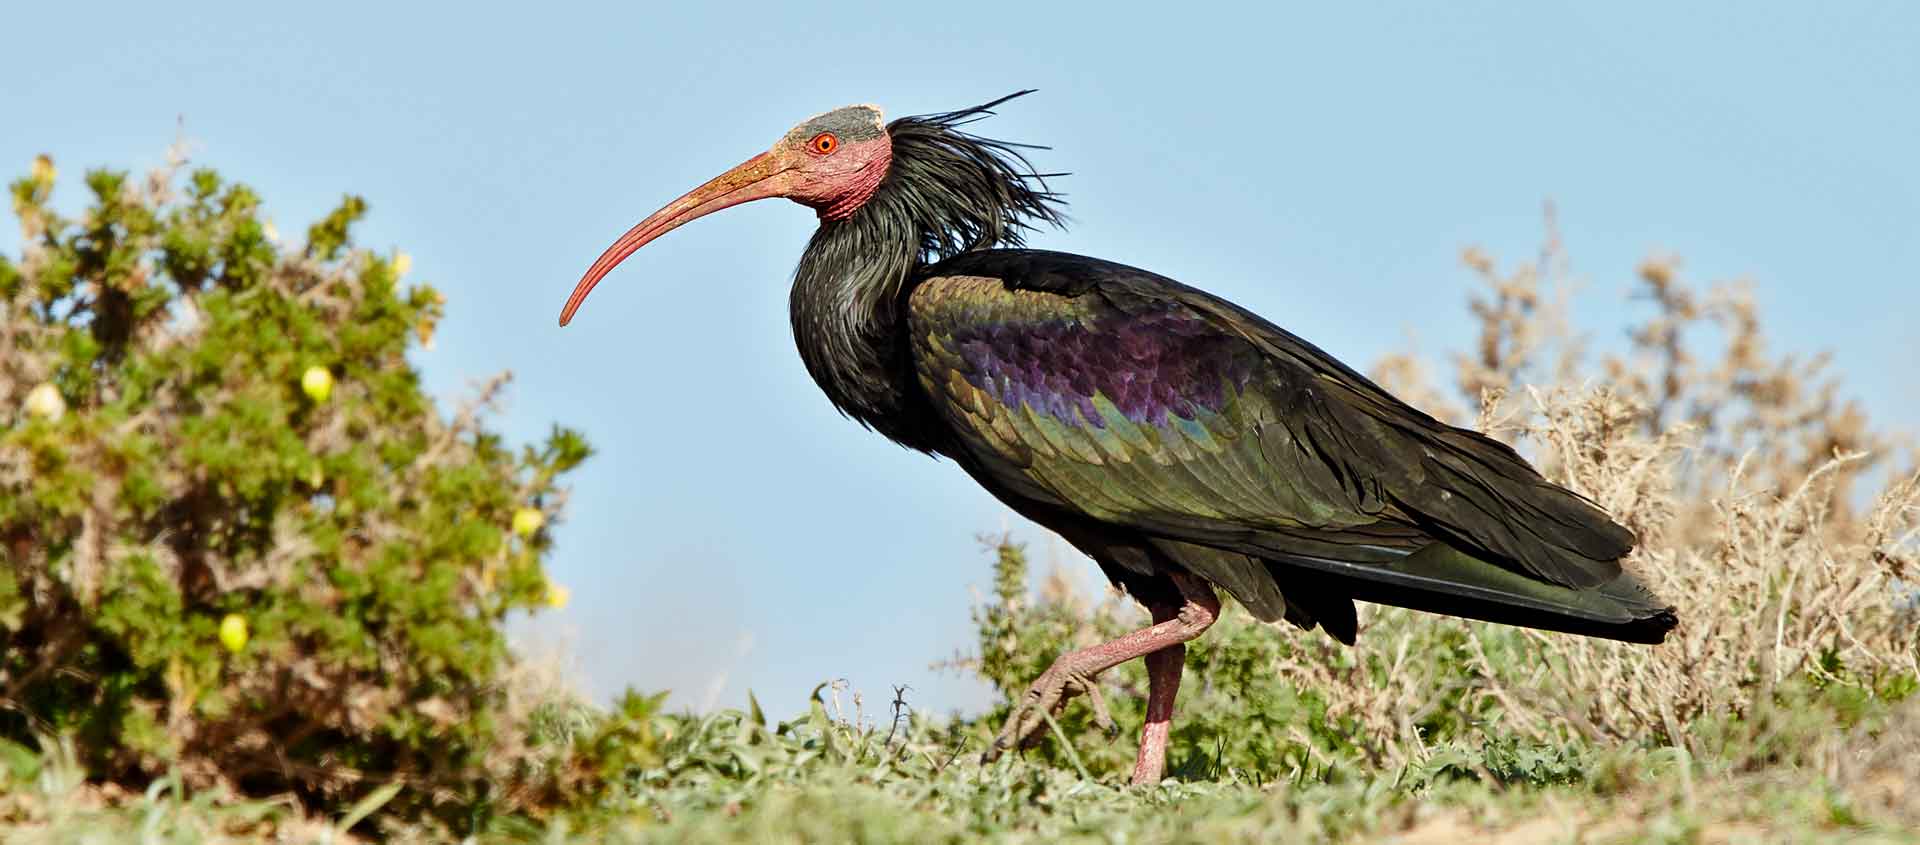 West Coast of Africa cruise image of Bald Ibis in Morocco